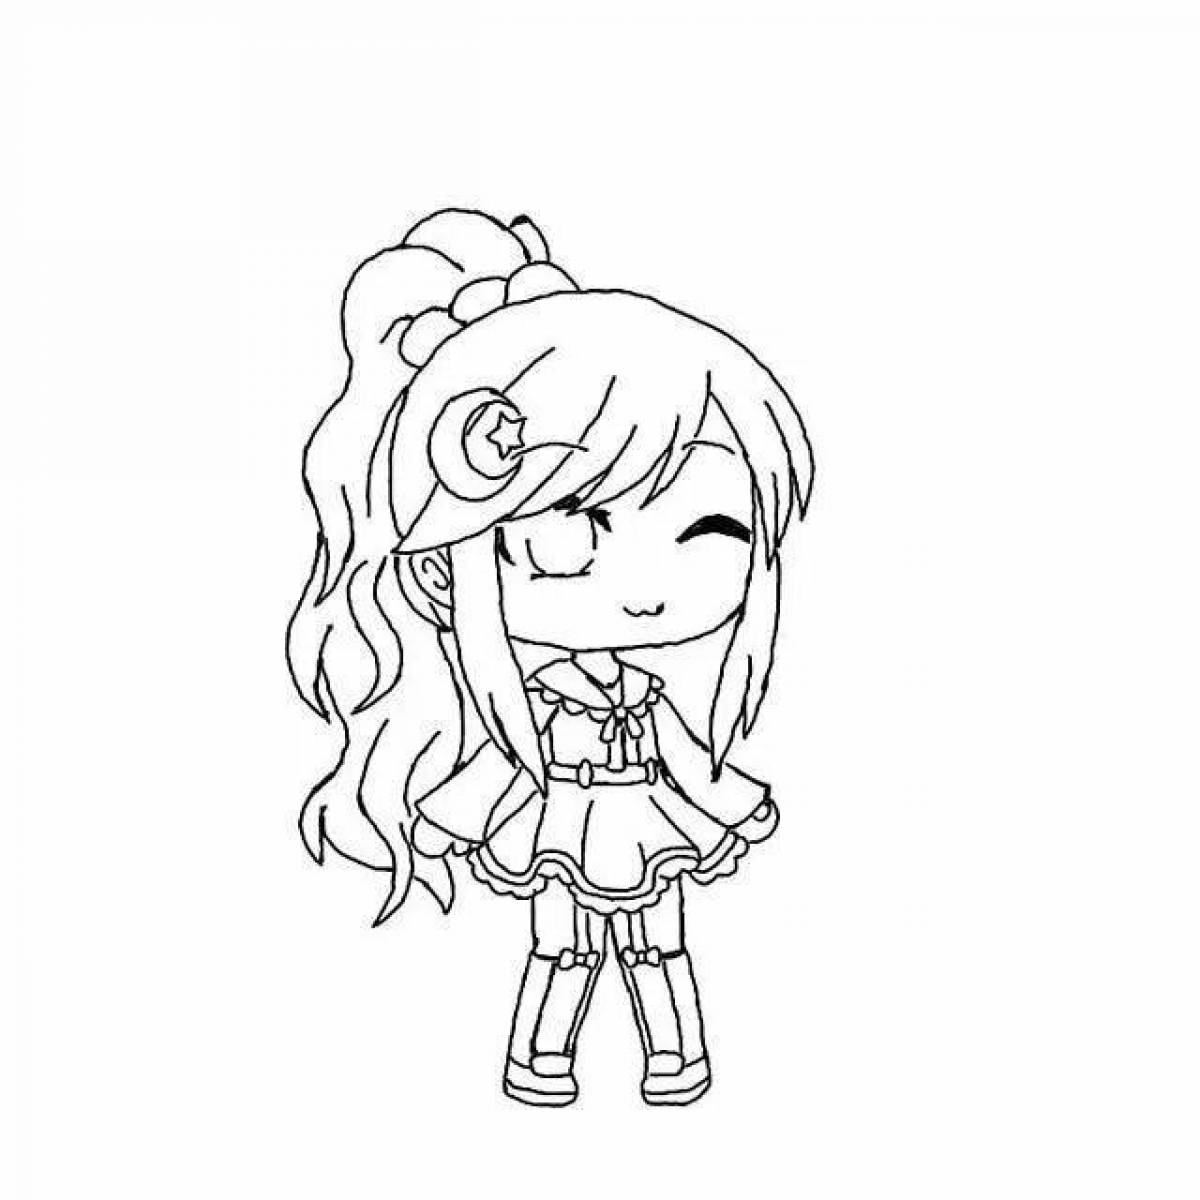 Gacha life coloring page with playful hair